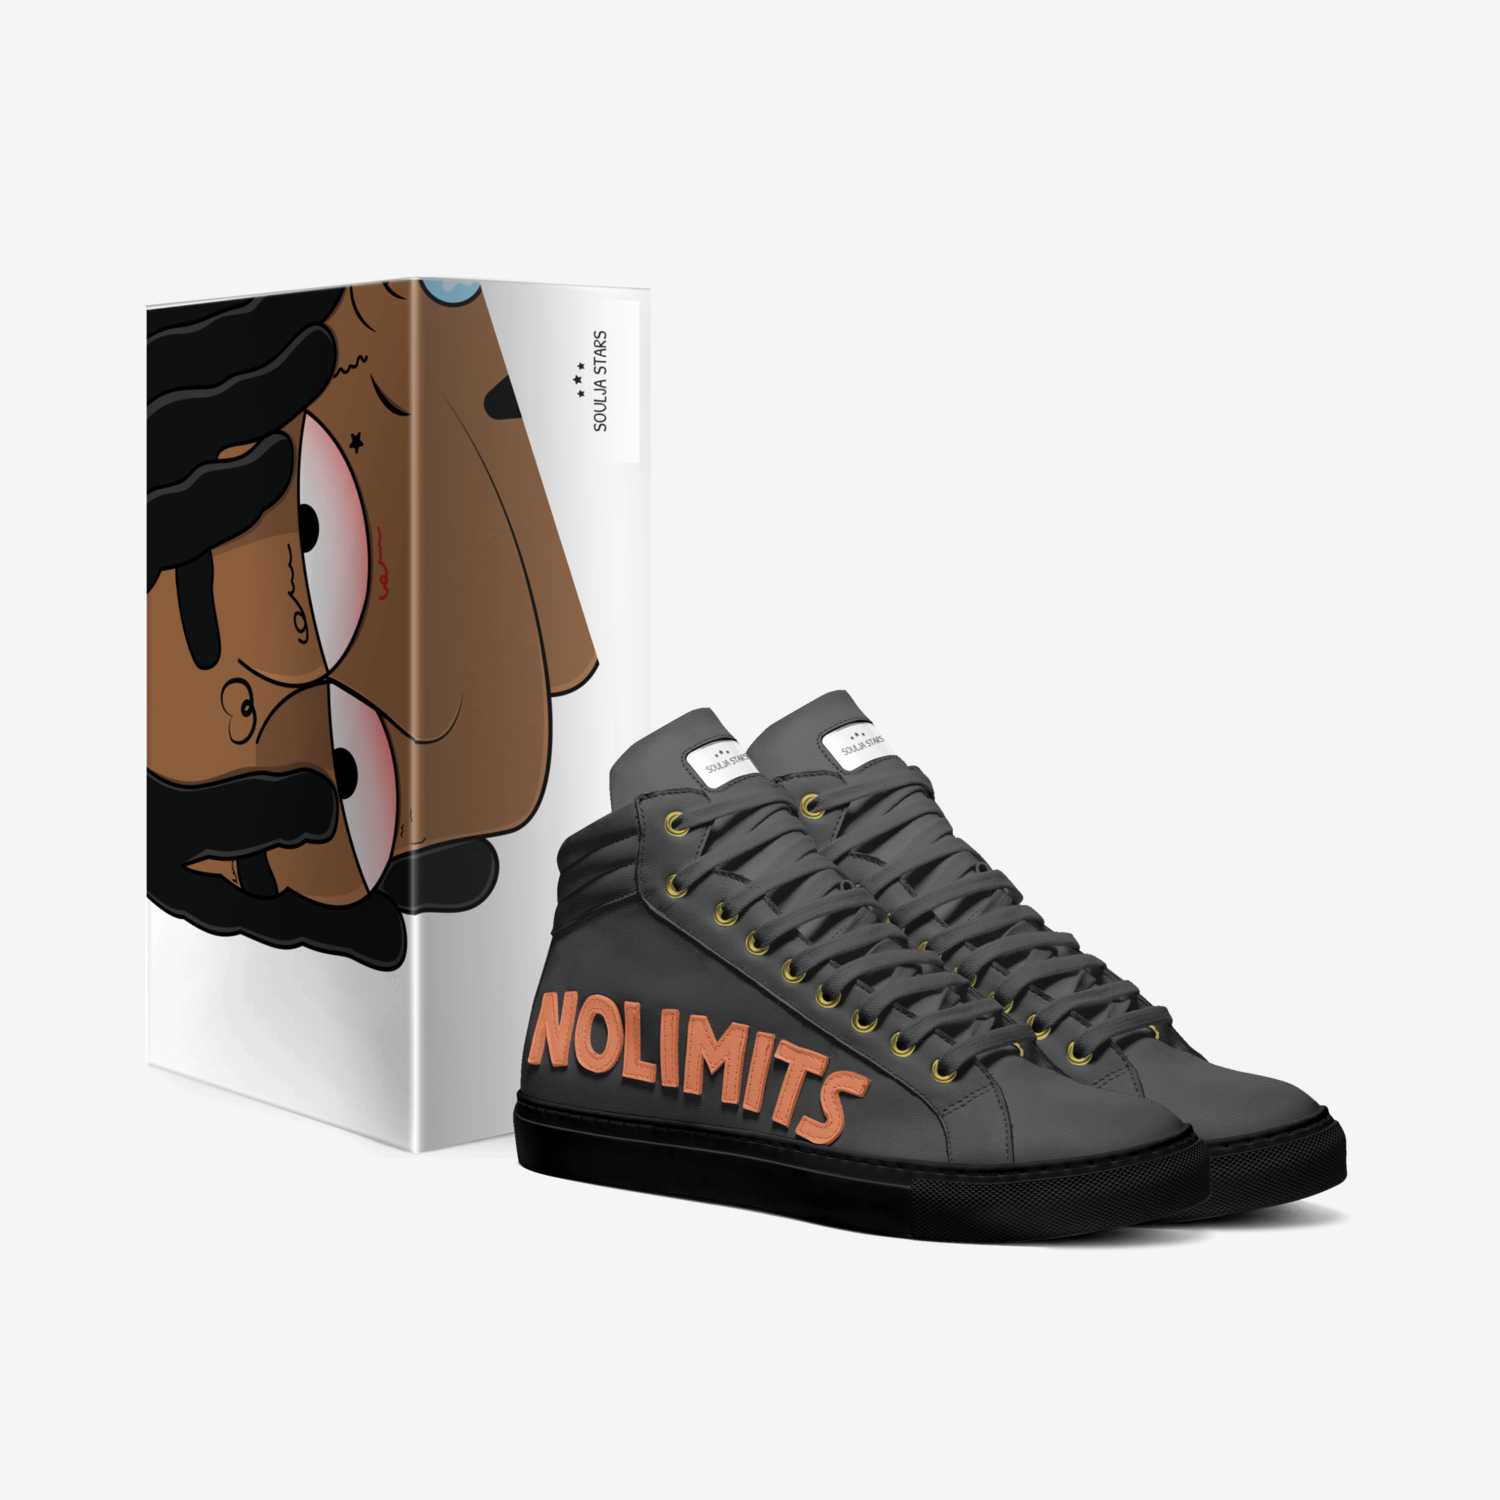 Soulja Stars custom made in Italy shoes by Deandre Way | Box view